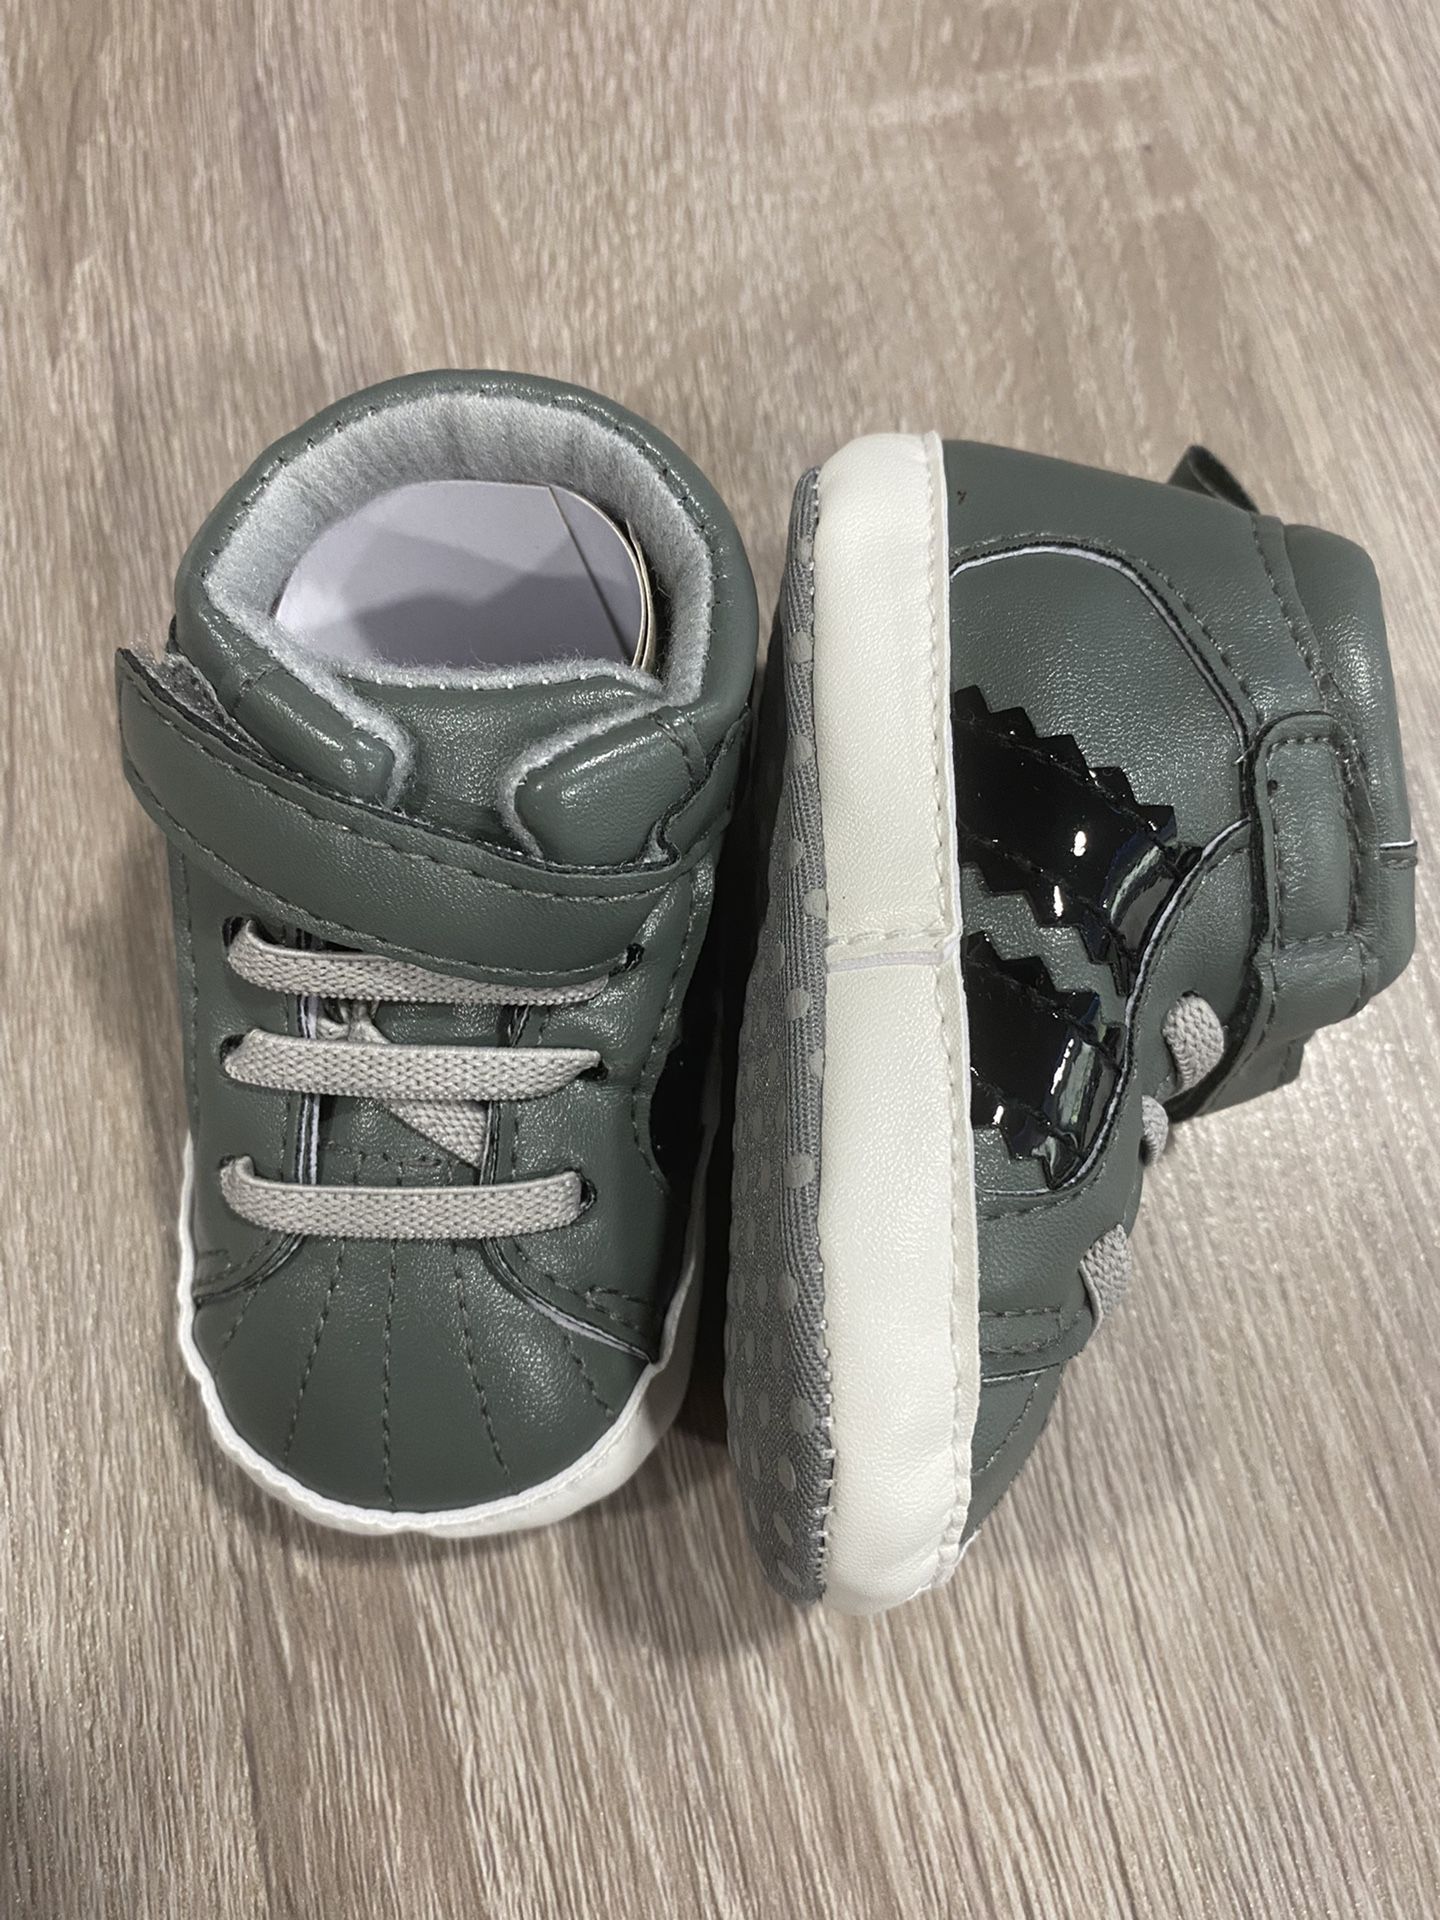 New baby boy crib shoes size 0-6 months